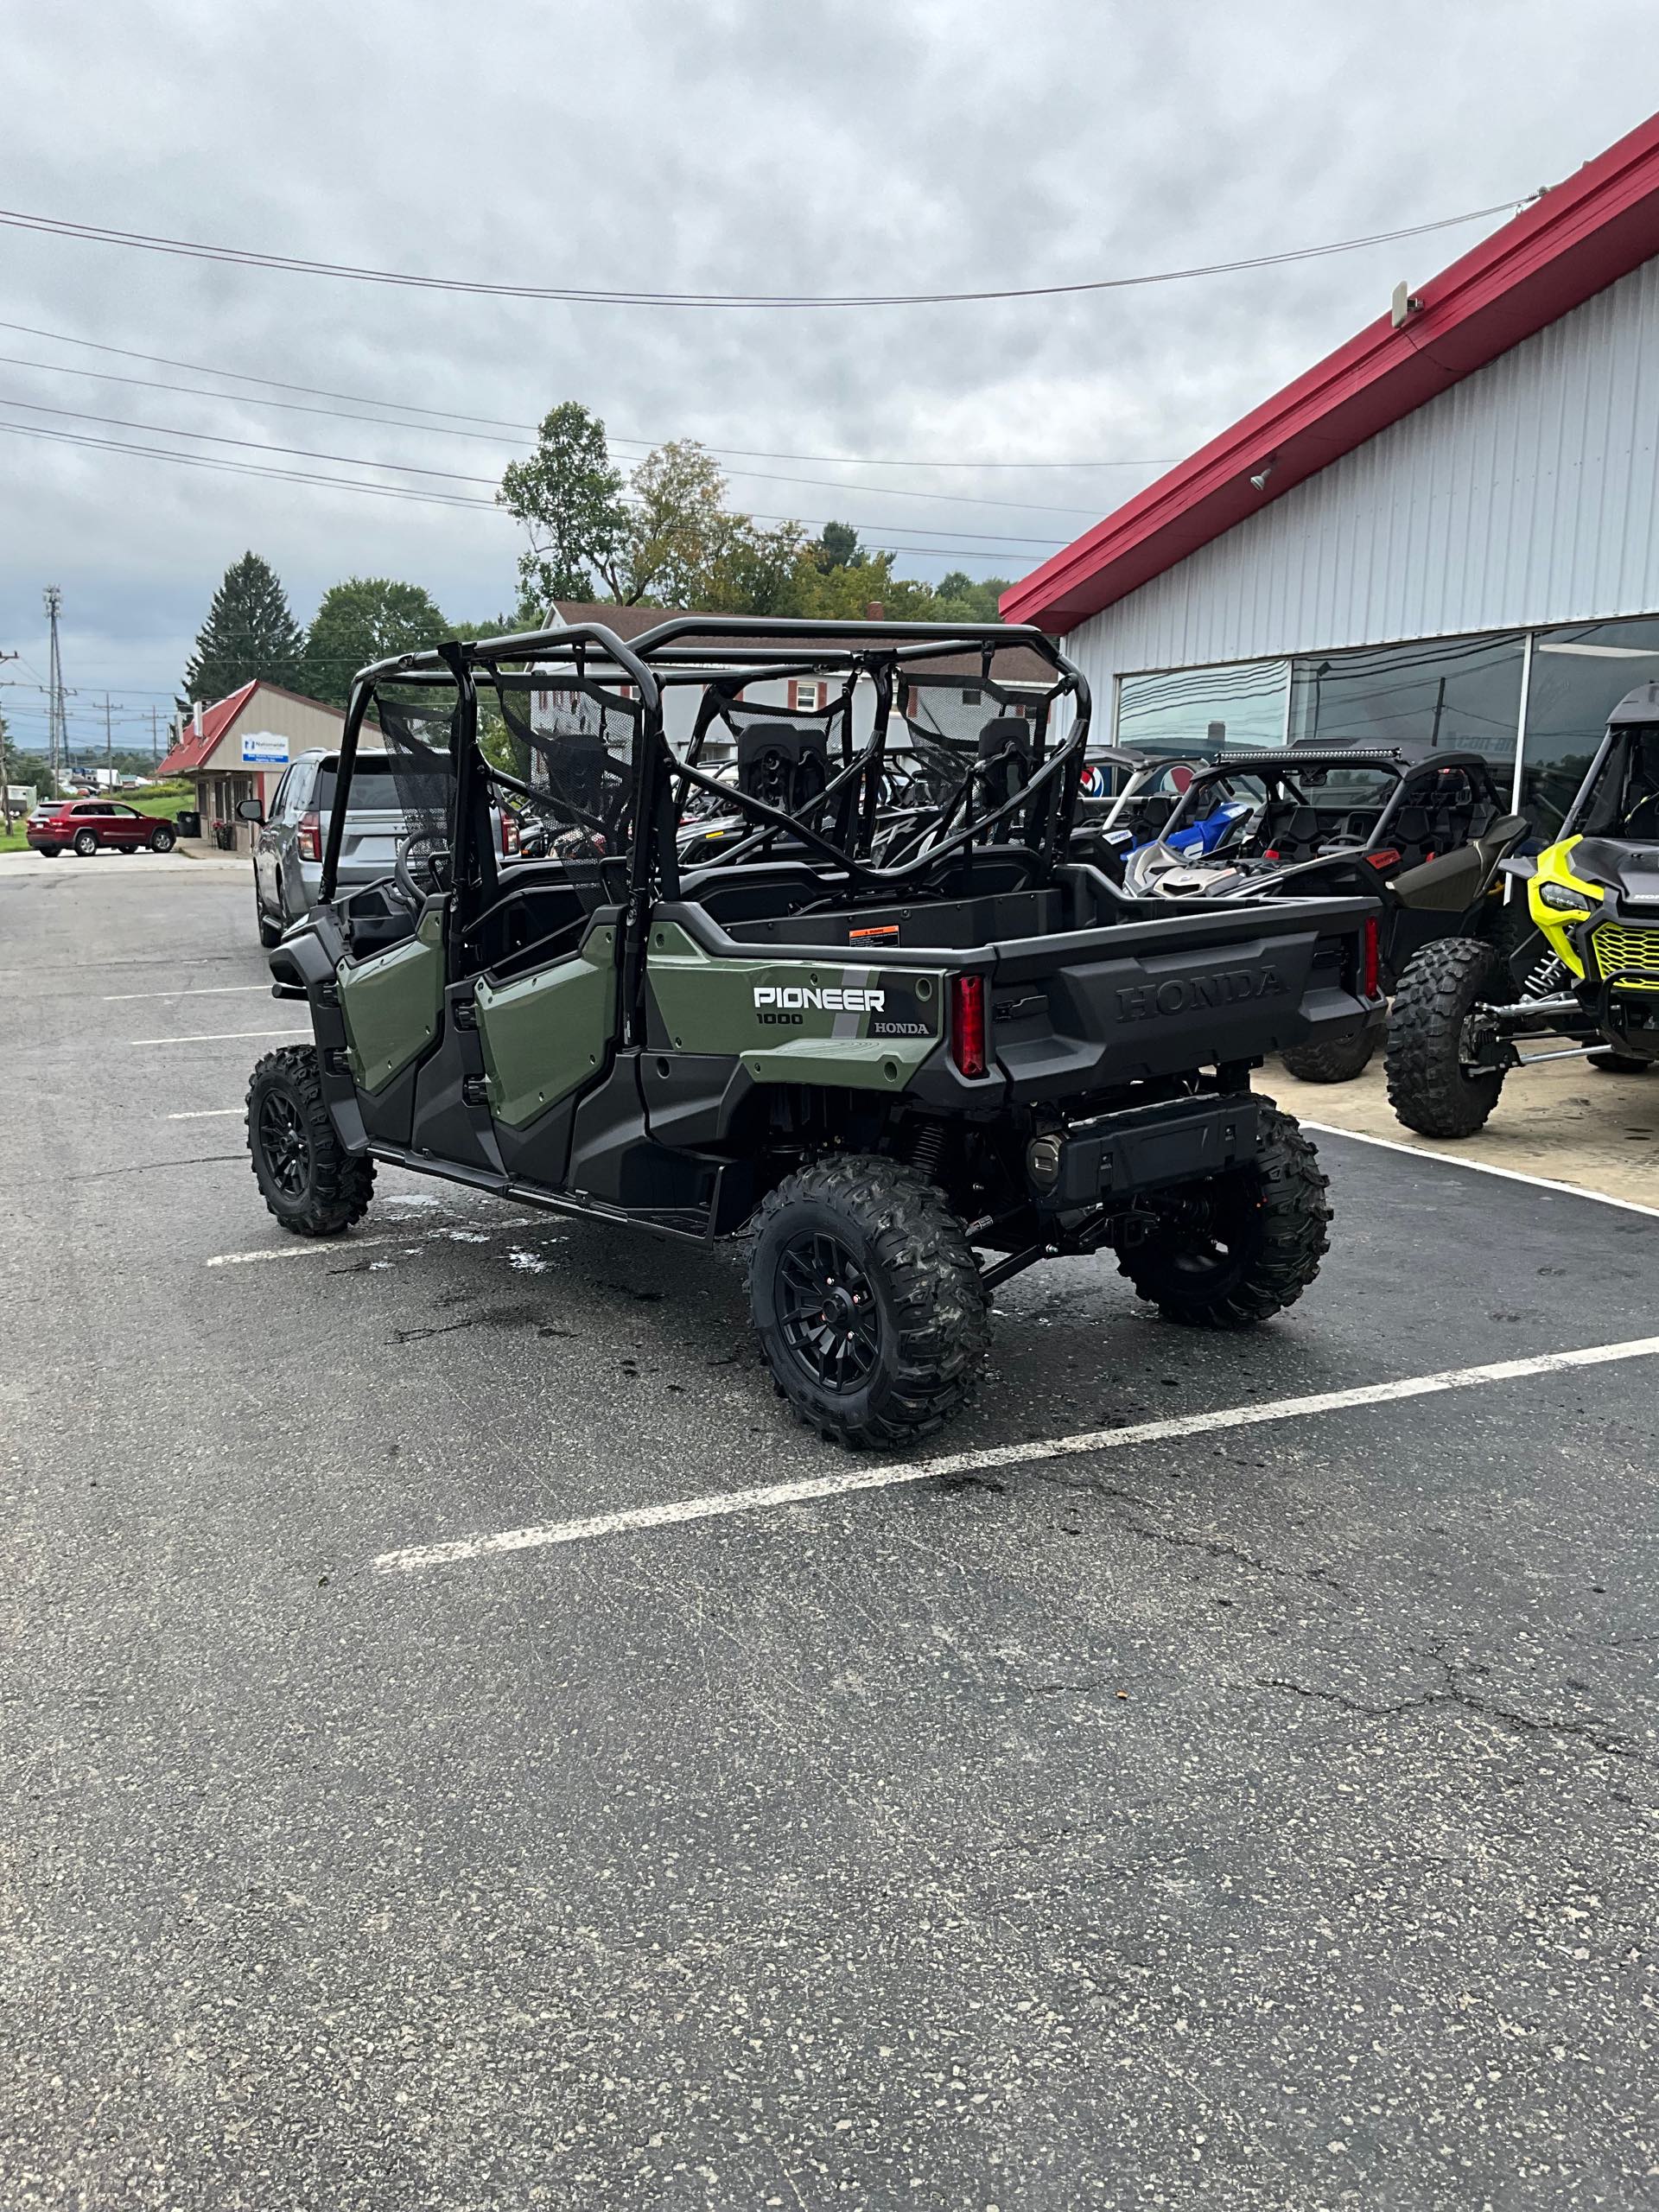 2023 Honda Pioneer 1000-6 Crew Deluxe at Leisure Time Powersports of Corry